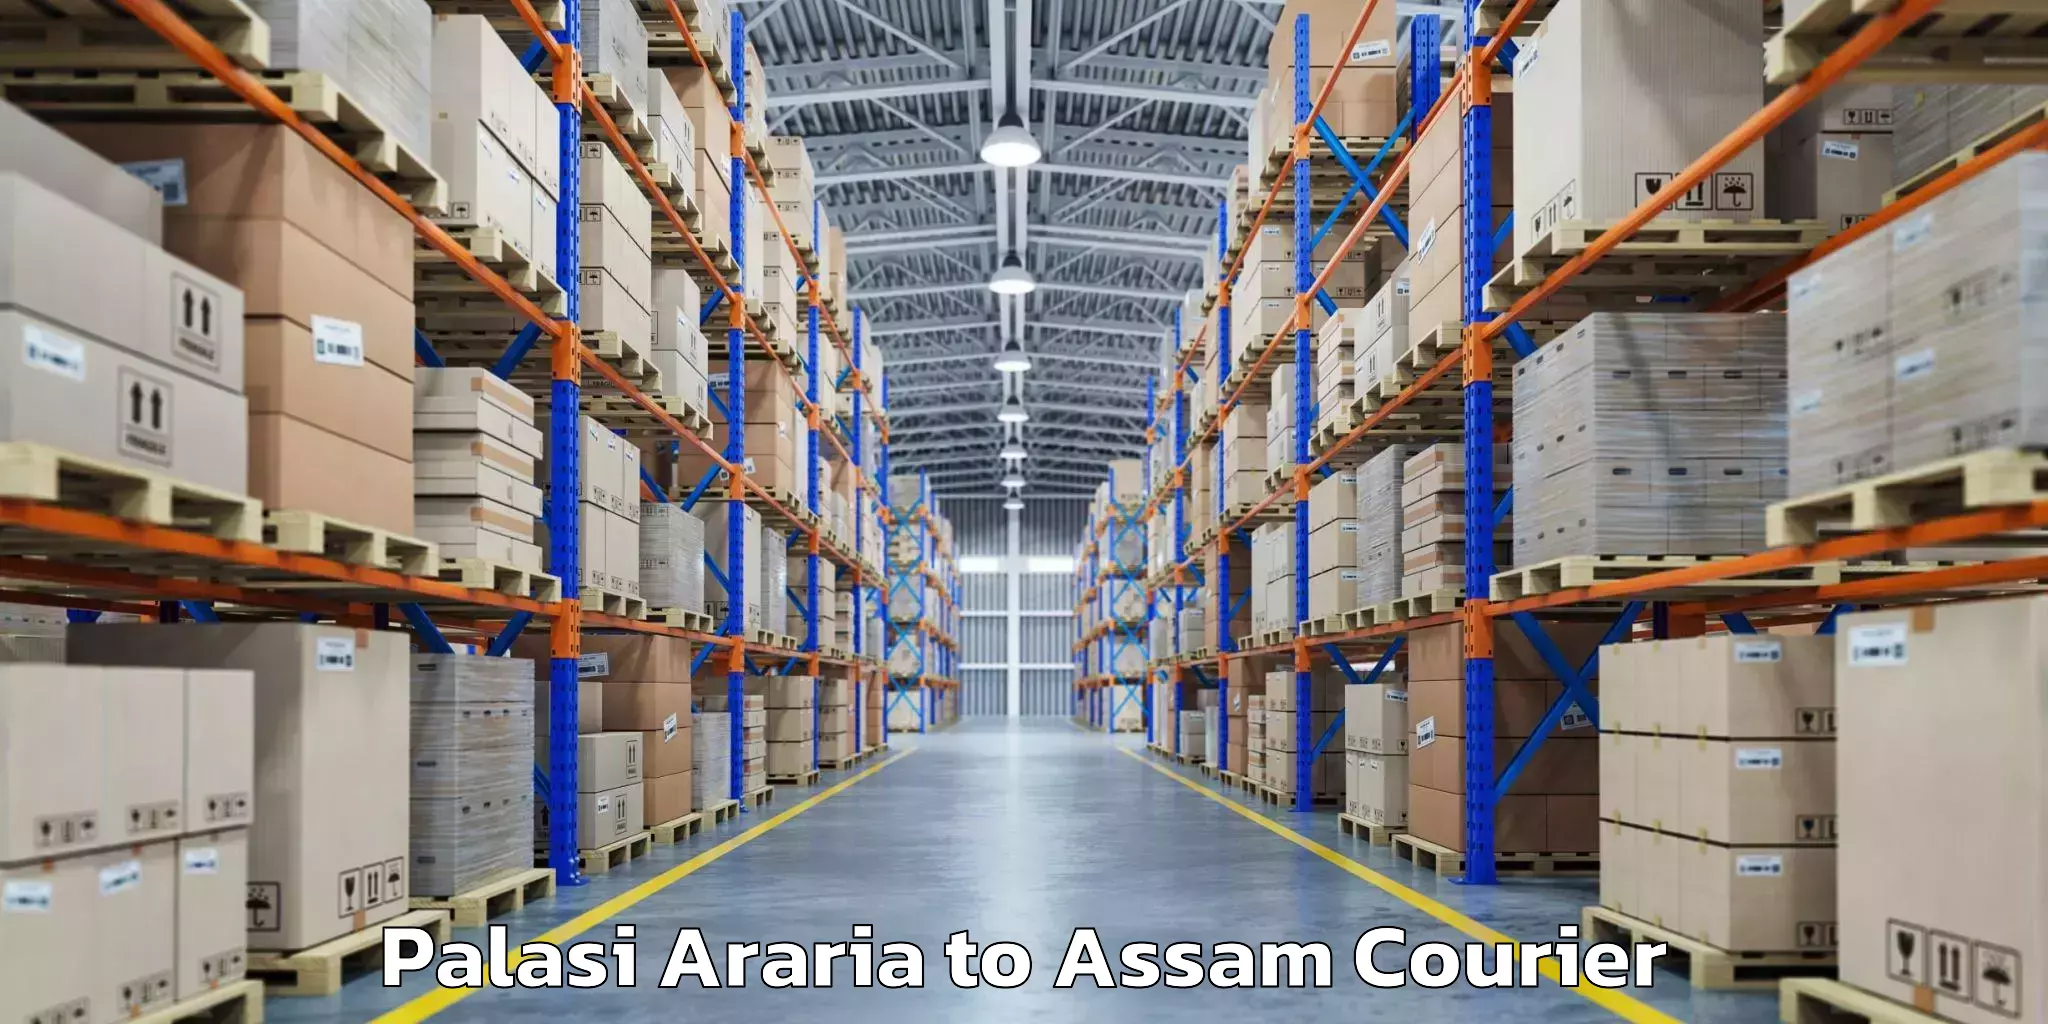 Luggage transport consulting Palasi Araria to Lala Assam